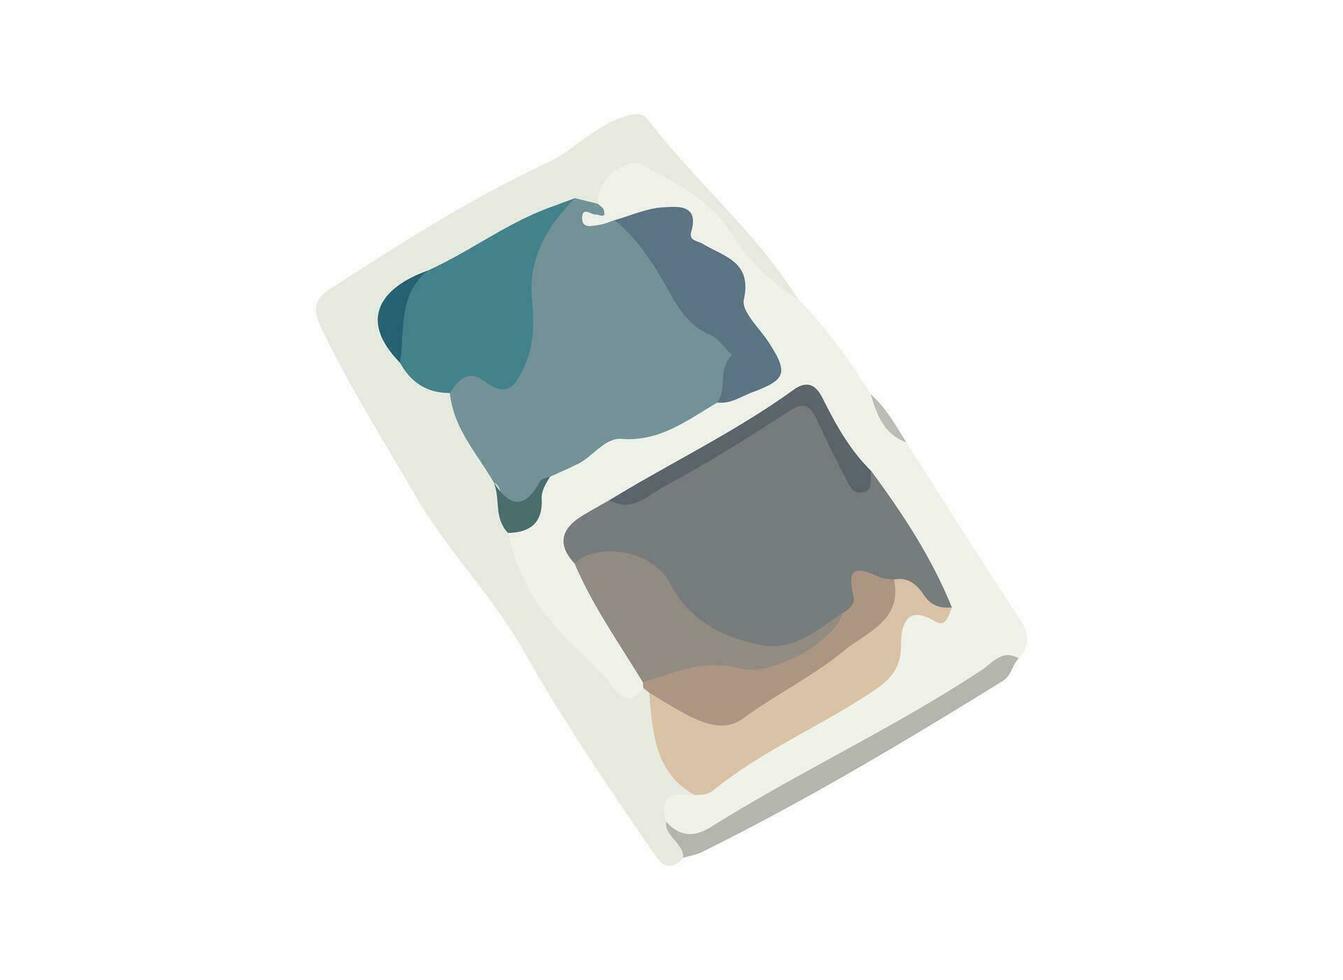 Palette with paints for the artist painted in watercolor. Vector illustration for study. Back to school, supplies for classes.